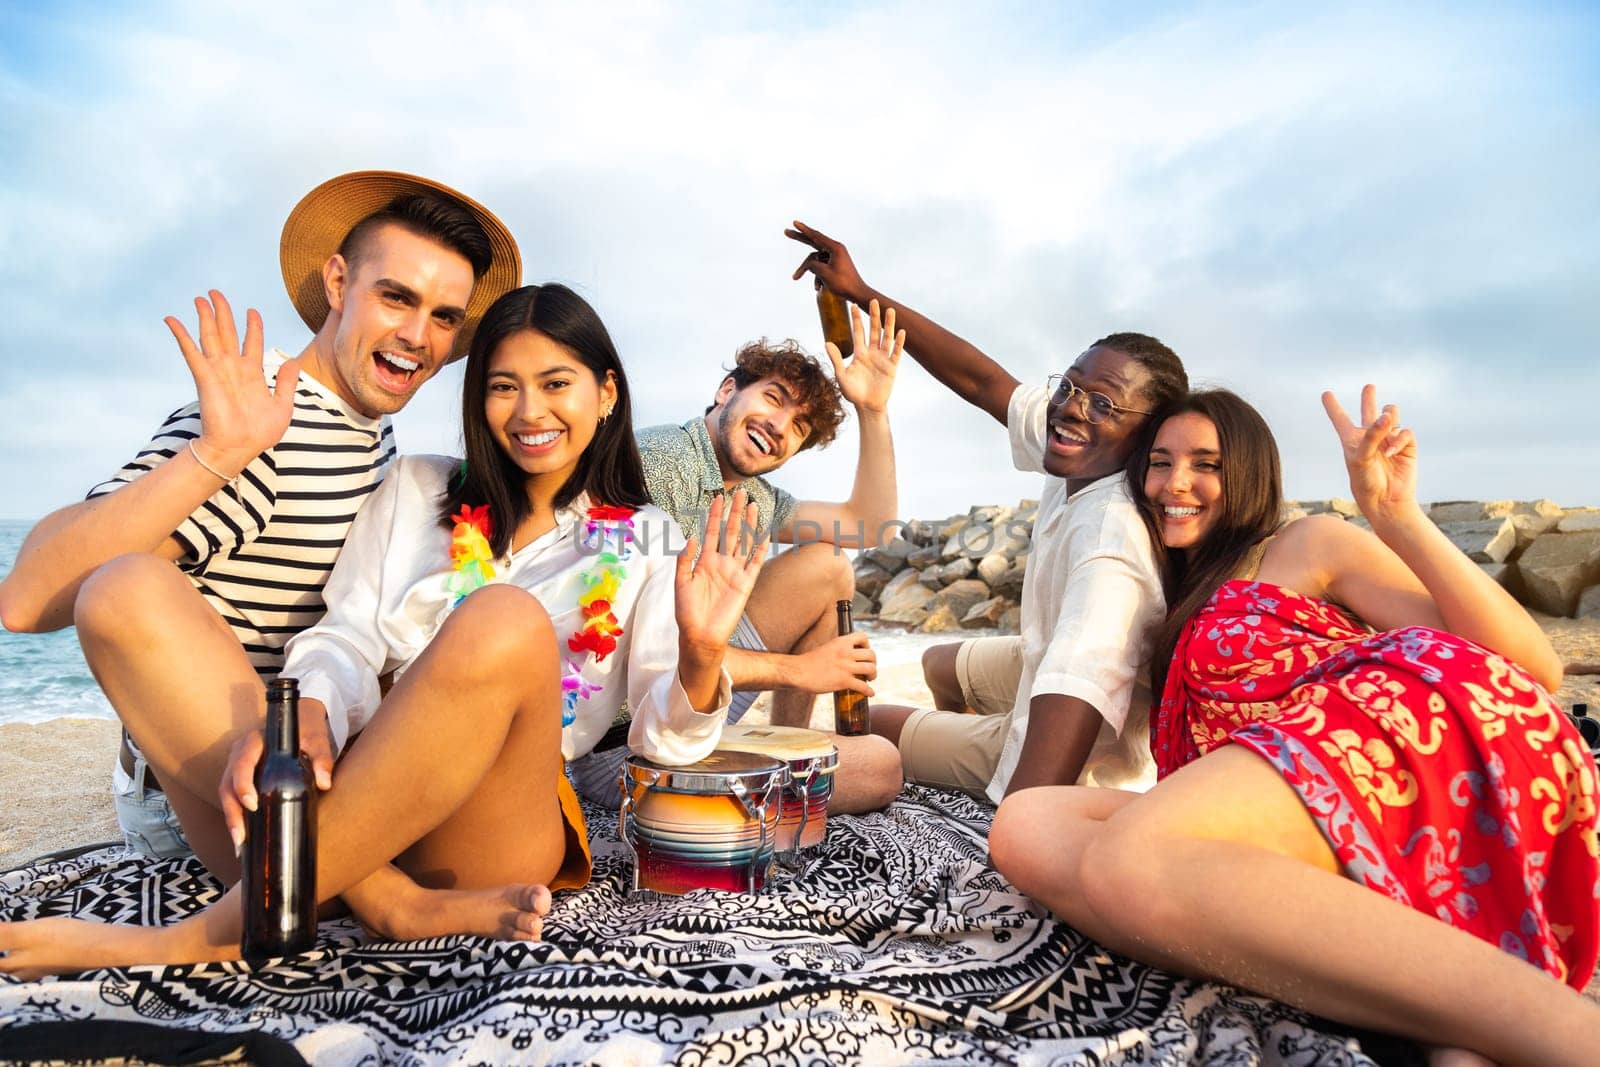 Happy, smiling group of multiracial having fun at the beach drinking beer together waving hand at camera. Vacation and friendship concept.